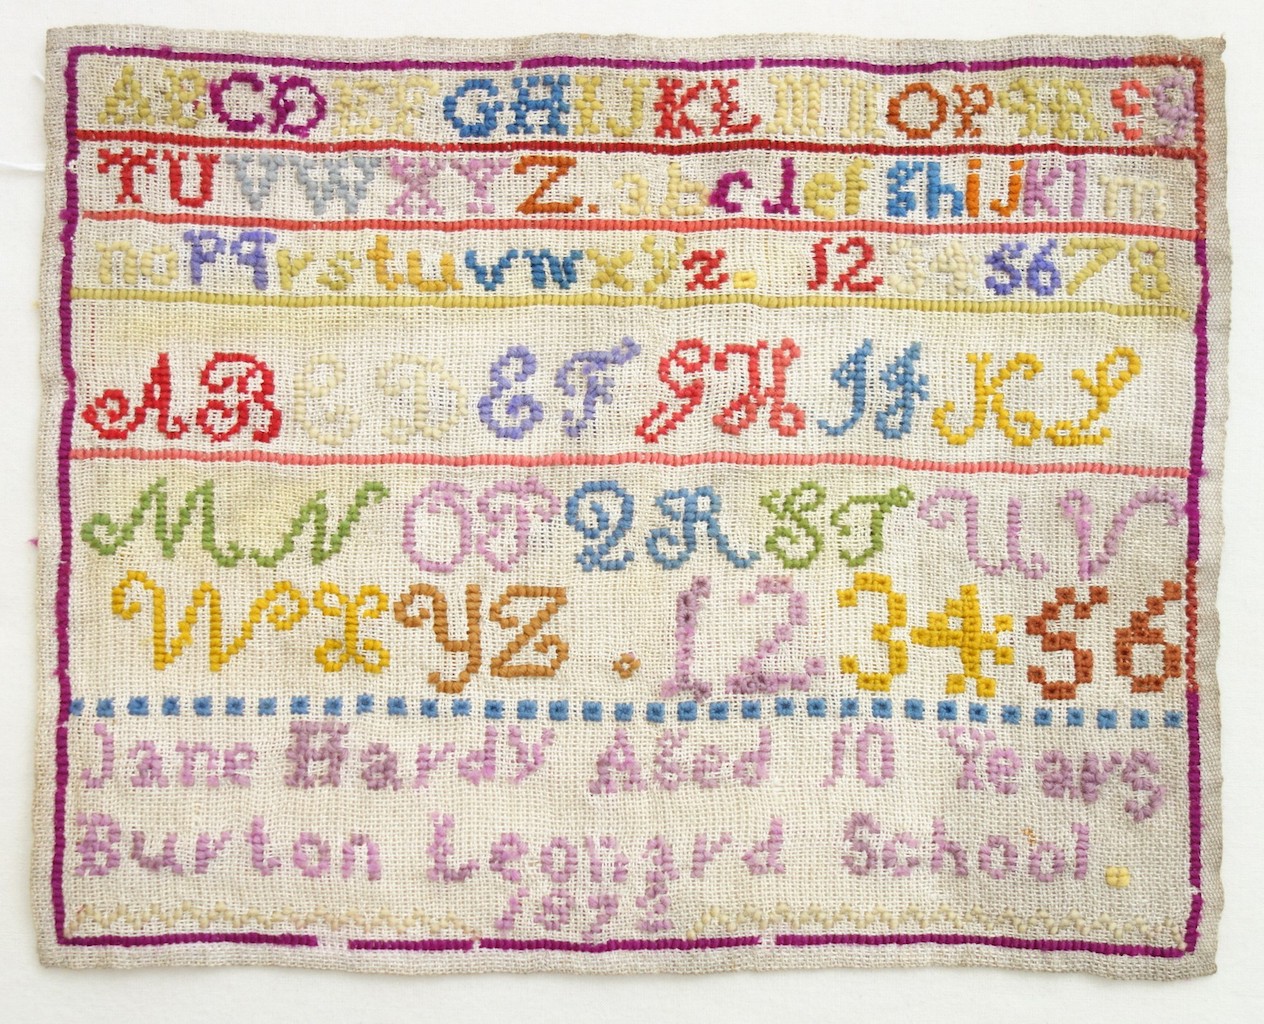 A school sampler worked in 1872 by Jane Hardy, aged ten, at the village of Burton Leonard, Yorkshire (TRC 2020.1606).